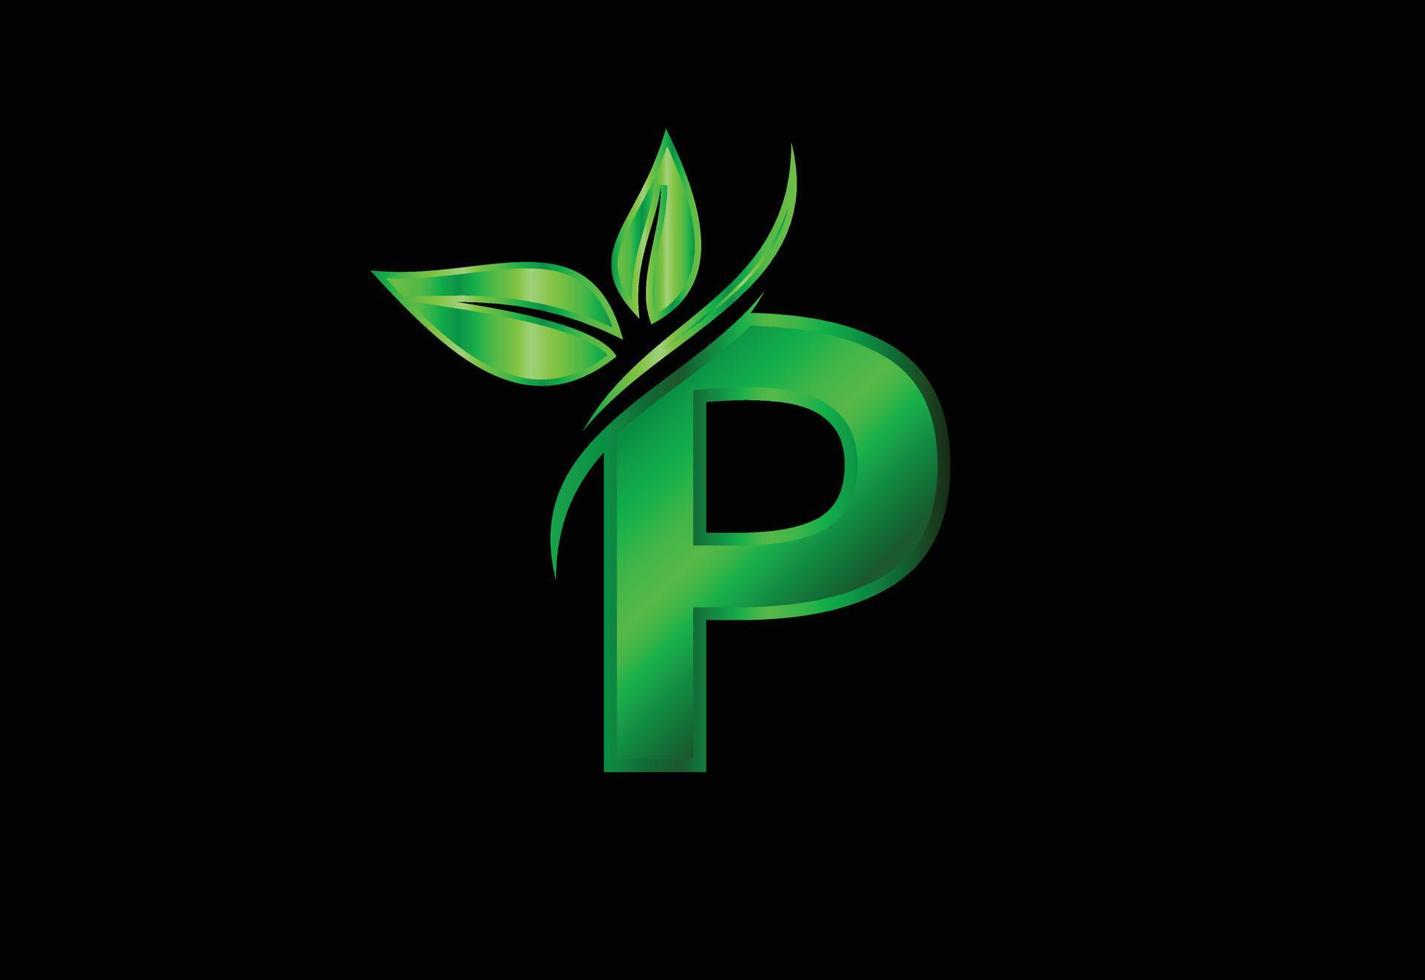 Initial P monogram alphabet with two leaves. Green eco-friendly logo concept. Logo for ecological vector